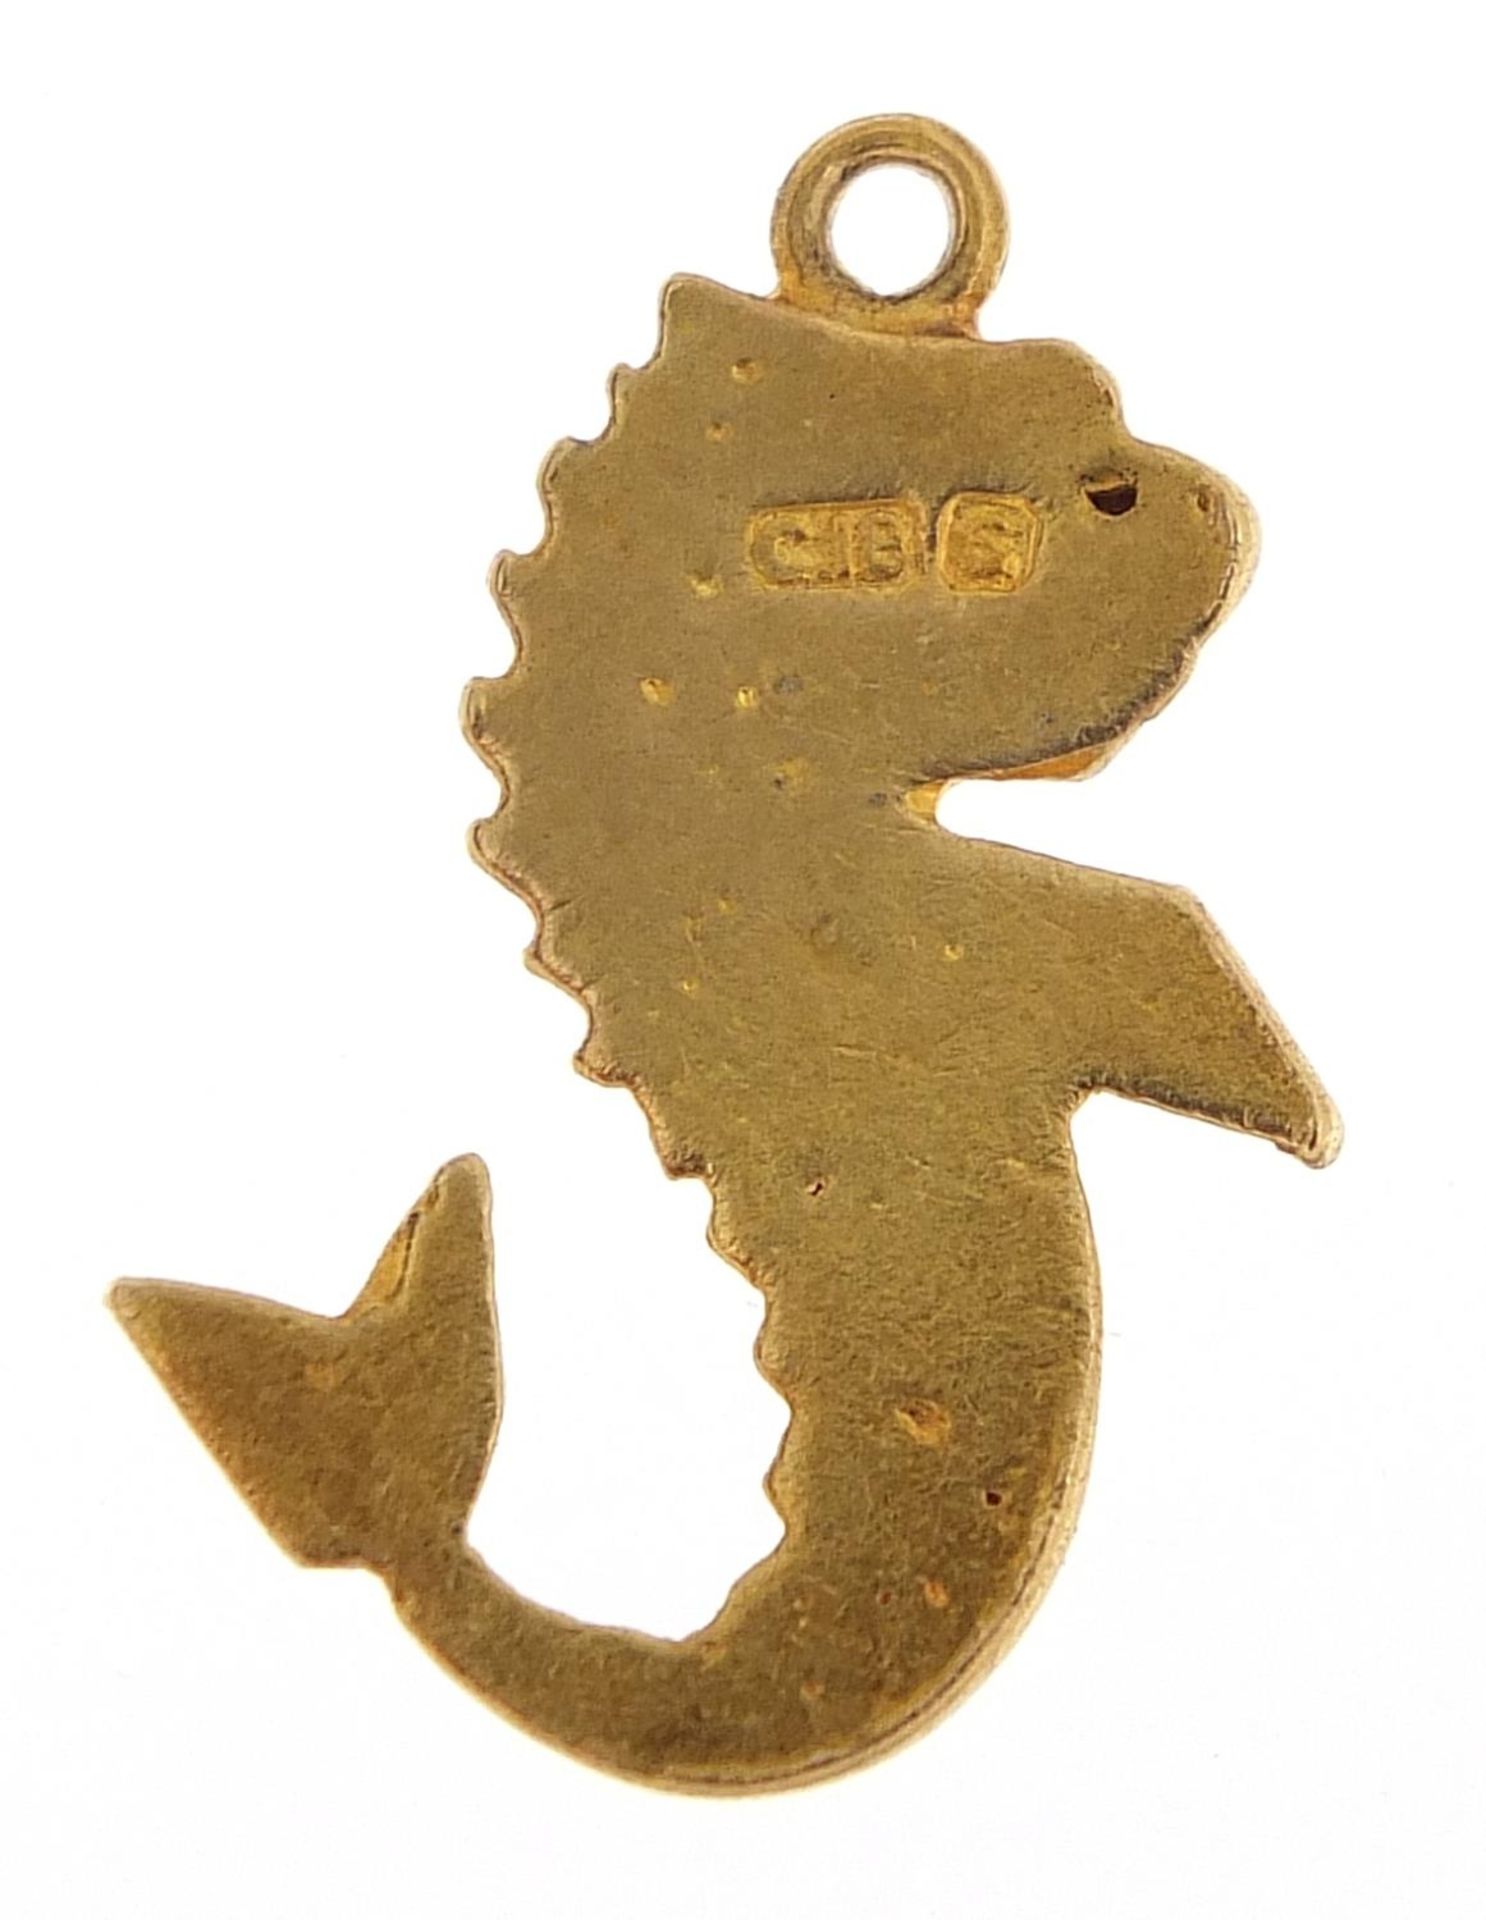 18ct gold mythical sea creature charm, 2.2cm high, 3.8g - Image 2 of 3